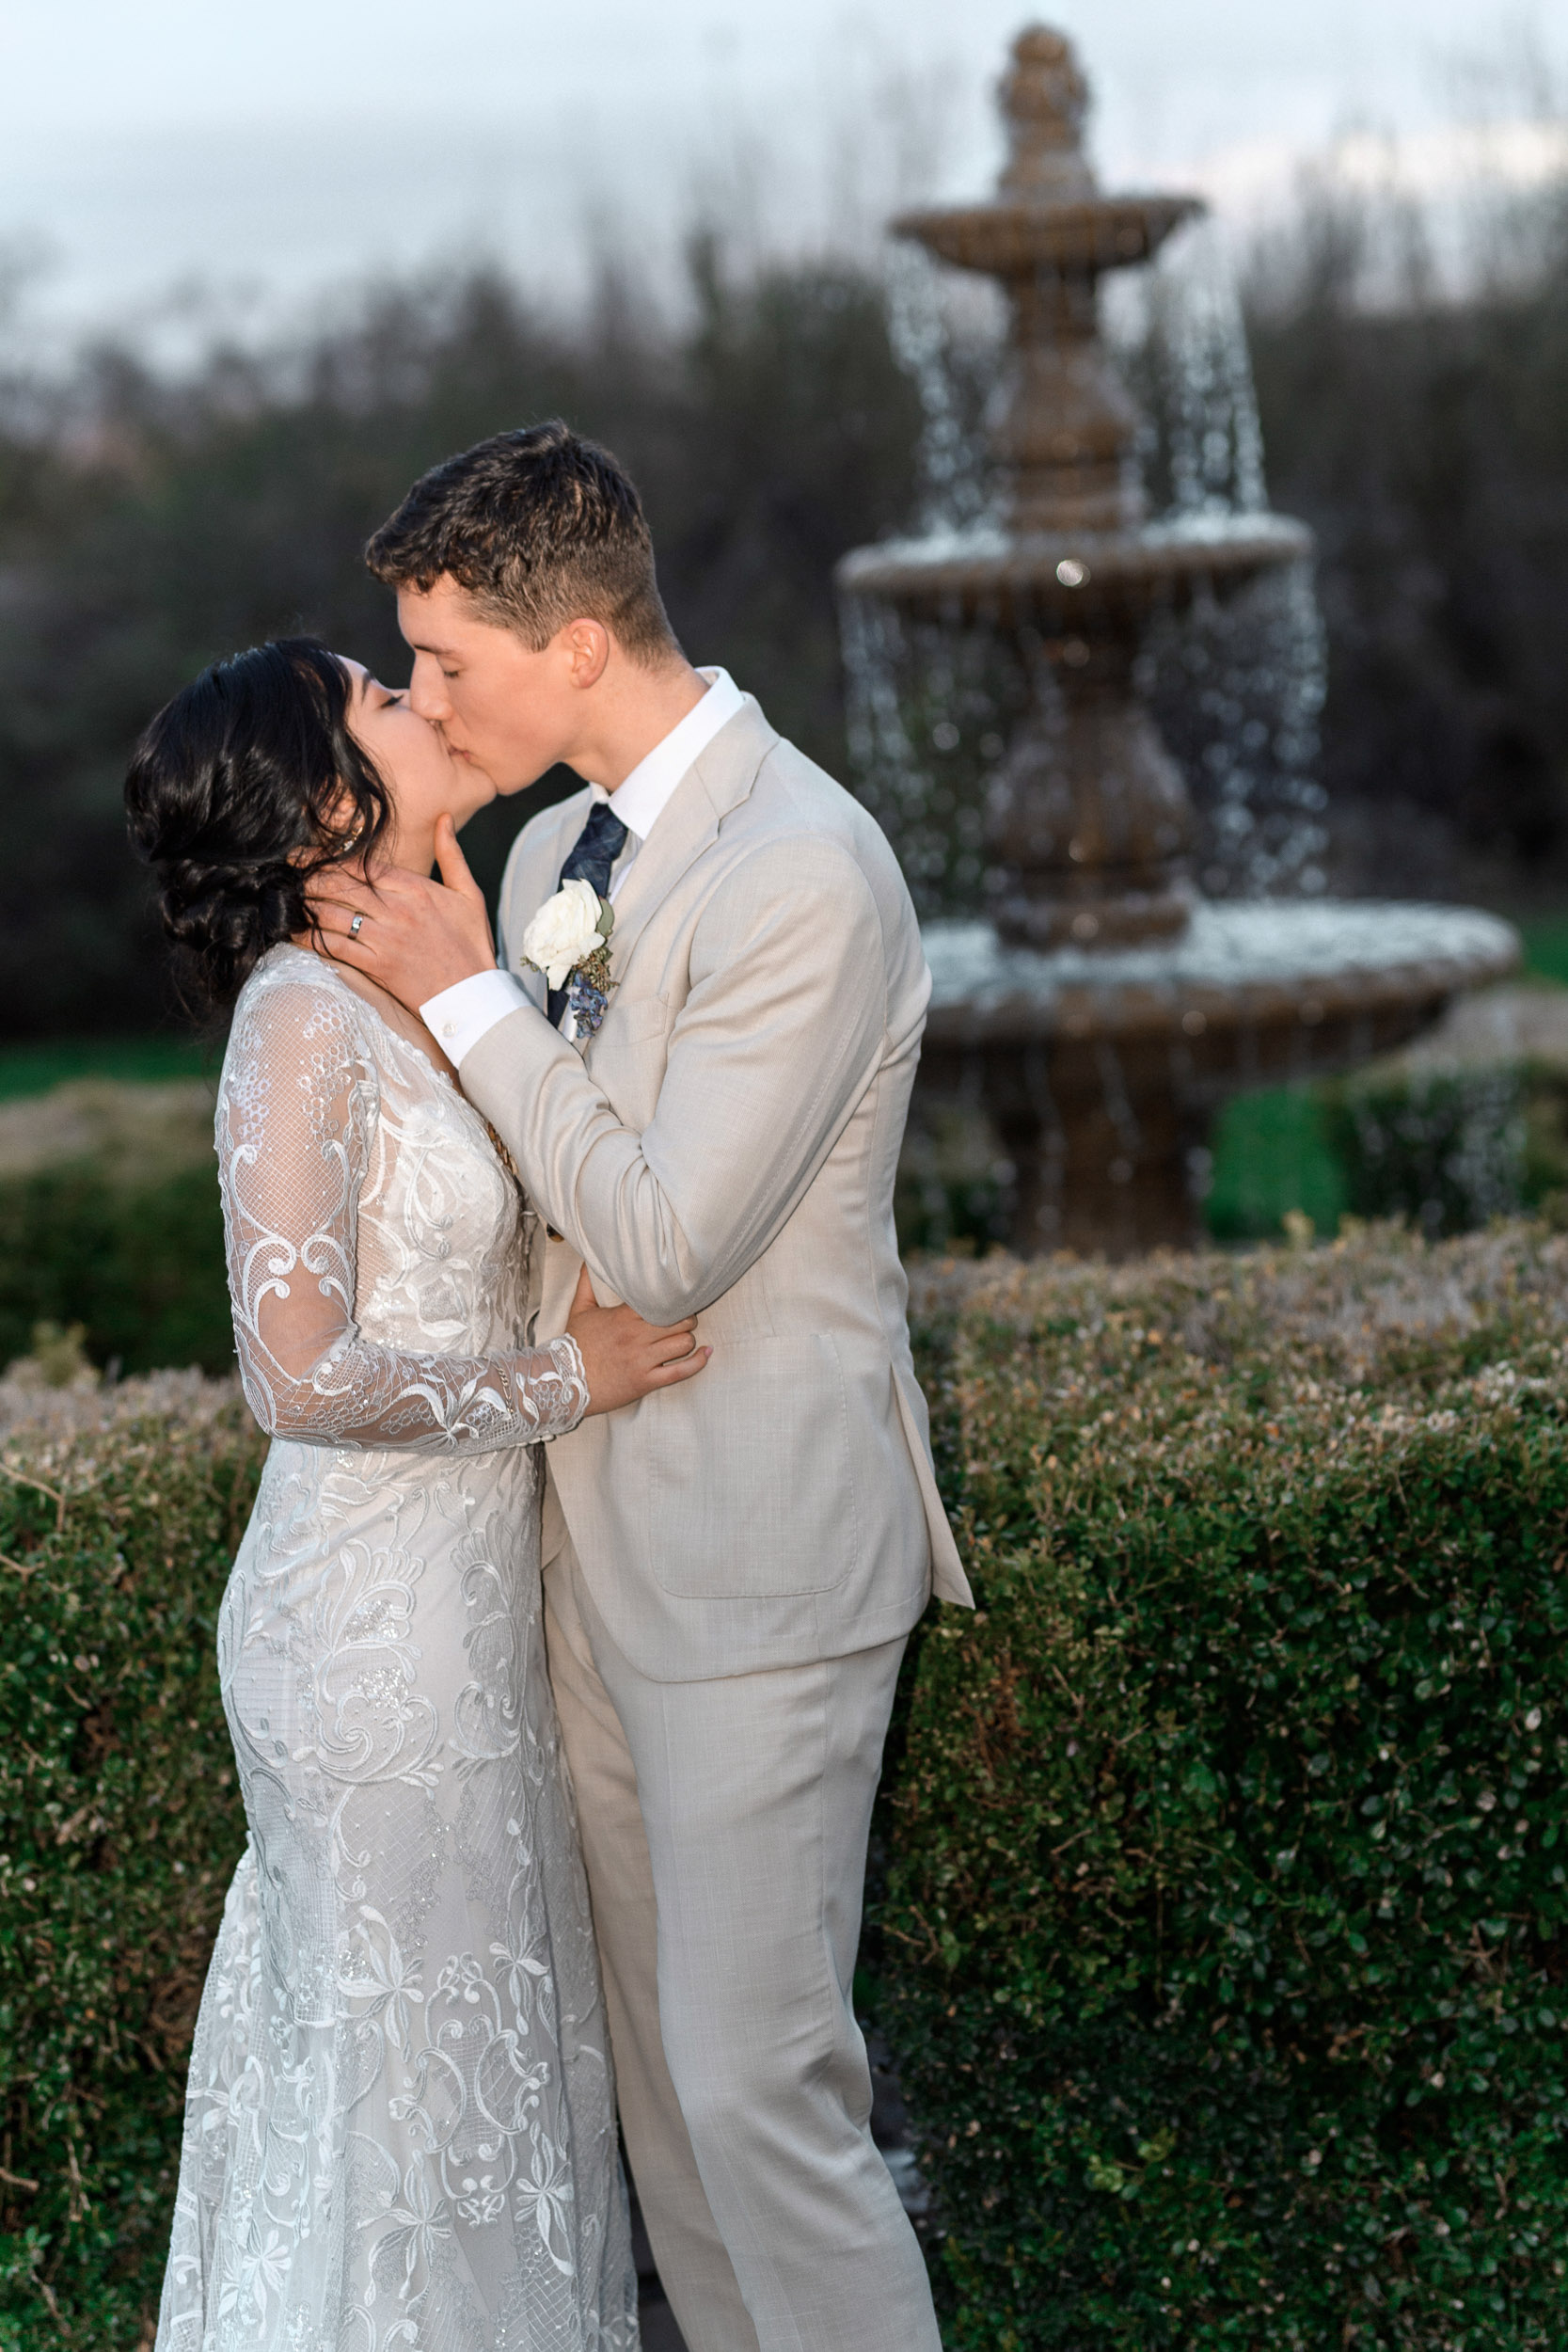 A bride and groom kiss in front of a fountain.